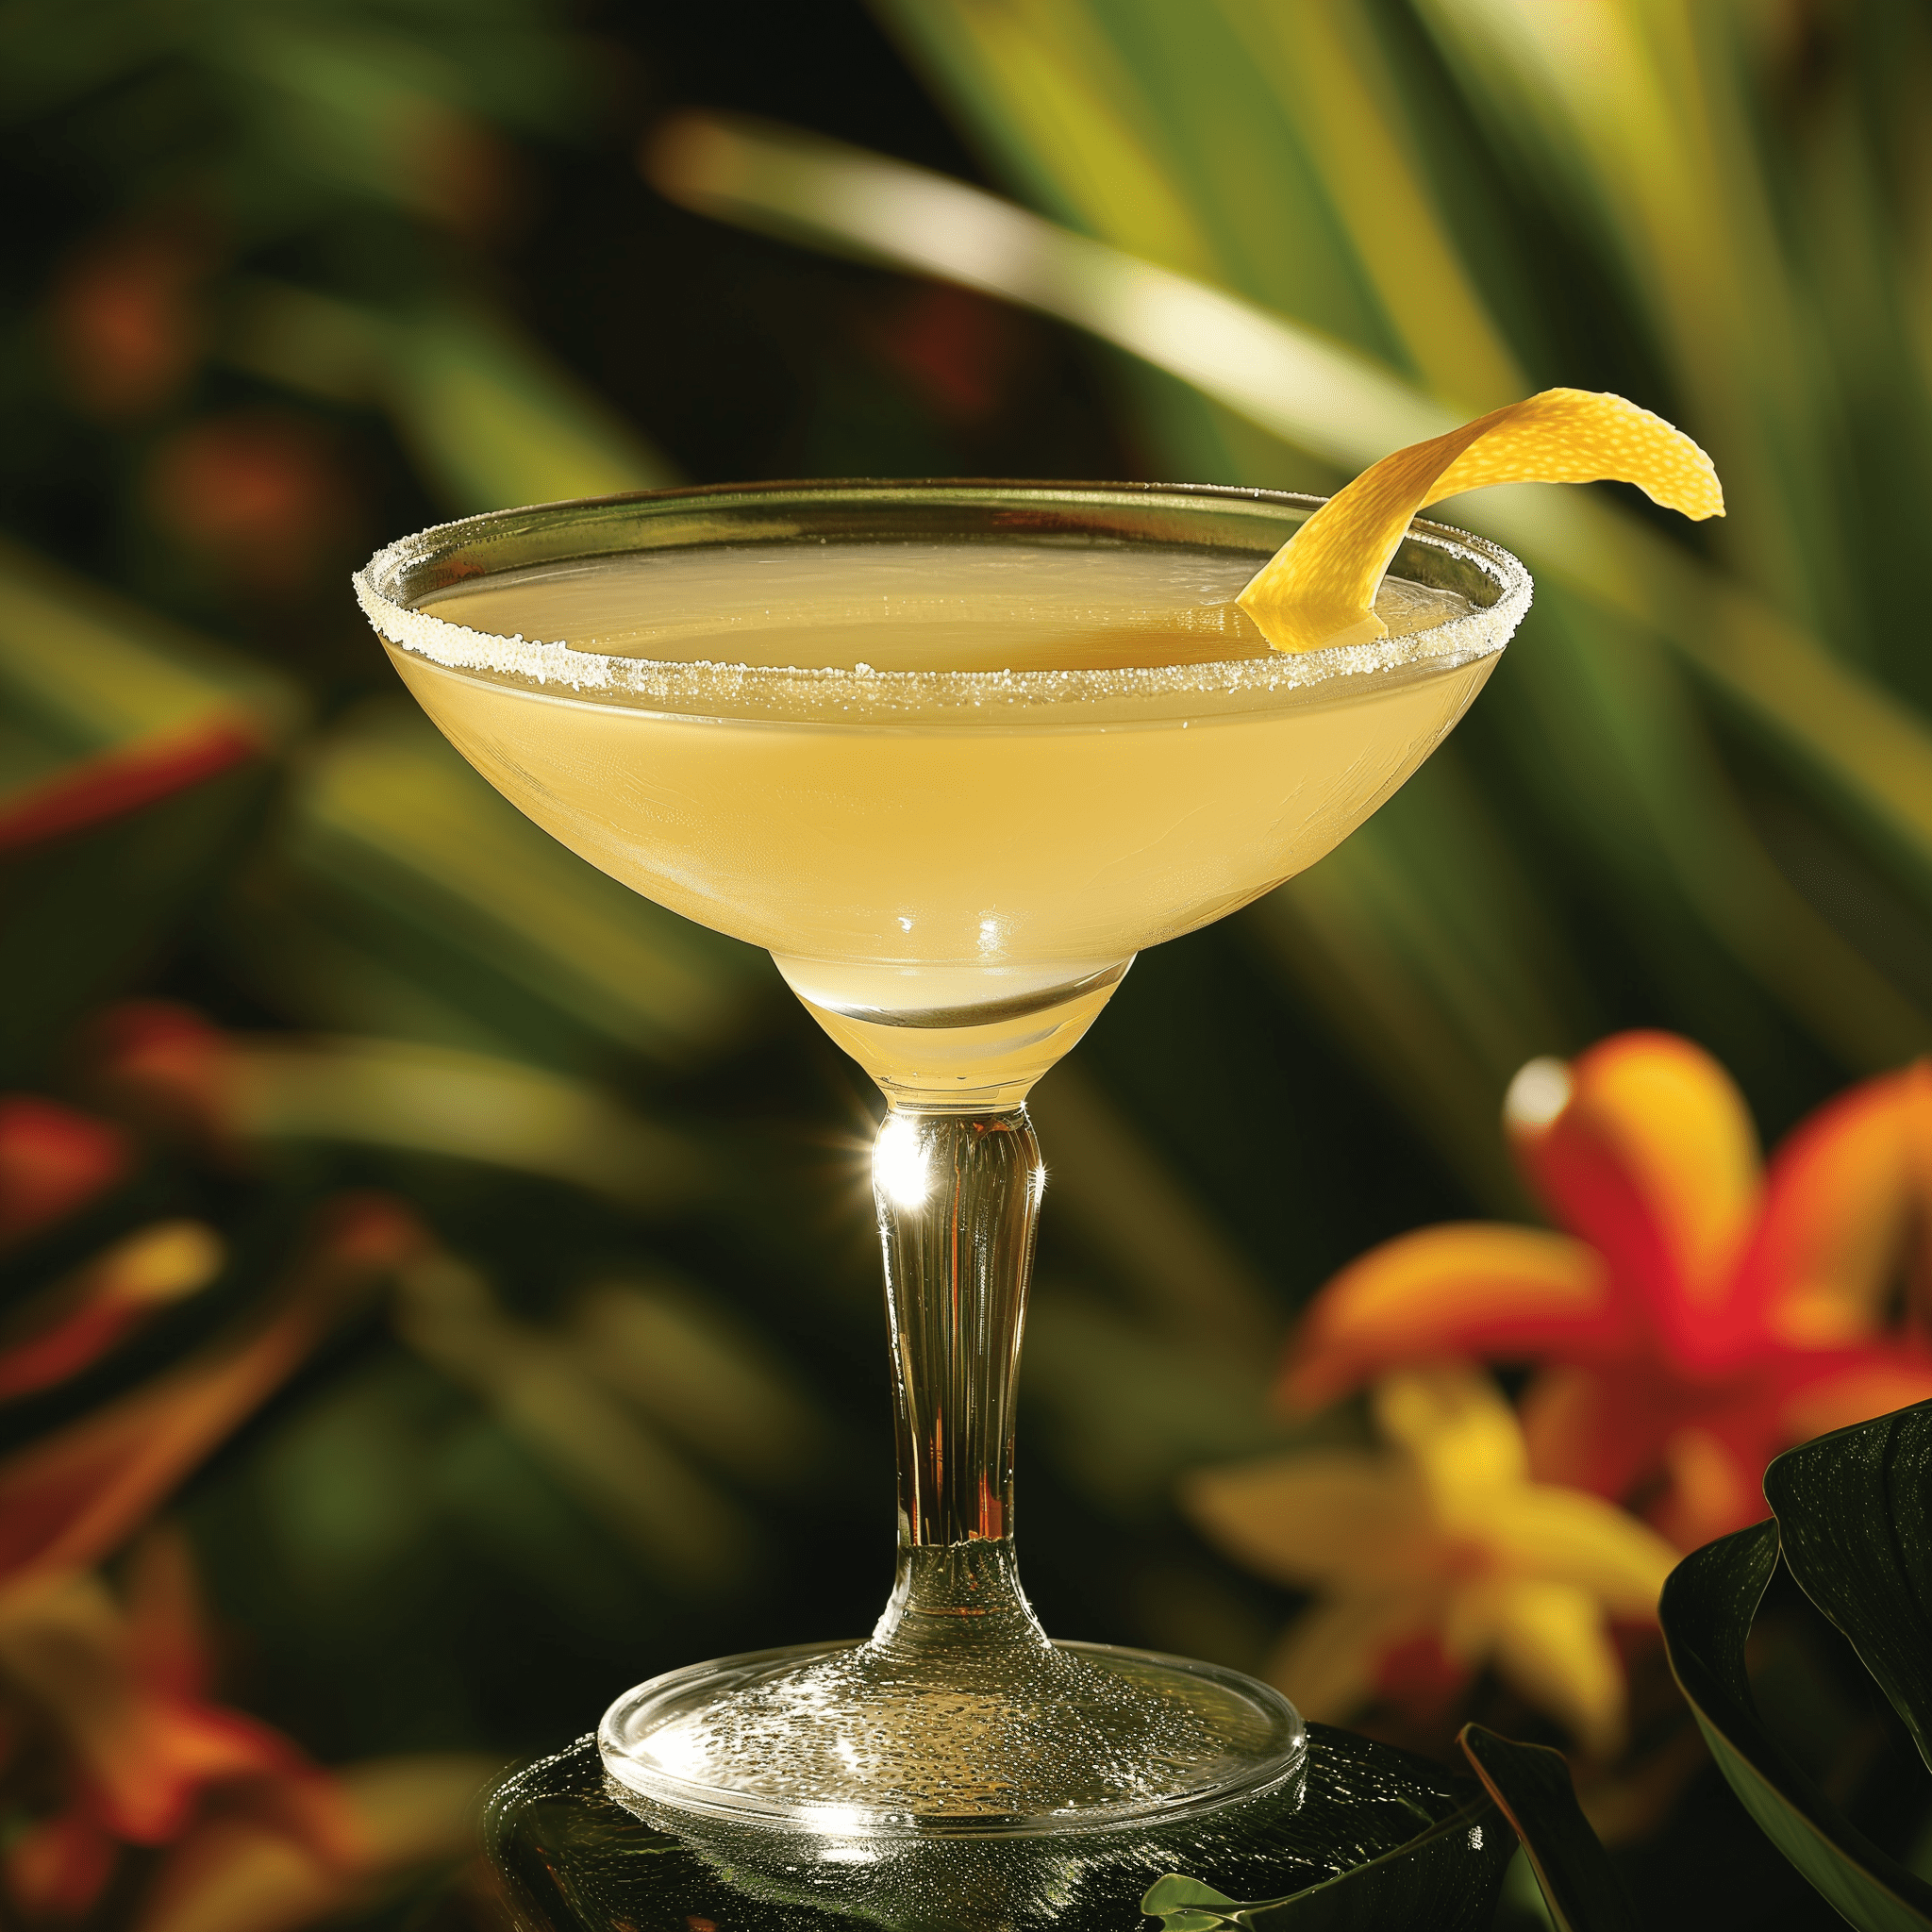 Caribbean Zest Cocktail Recipe - The Caribbean Zest is a delightful blend of sweet and sour, with the Cointreau providing a smooth orange backdrop to the zesty lemon juice. The Mount Gay Silver rum adds a clean, slightly spicy kick that is both invigorating and satisfying.